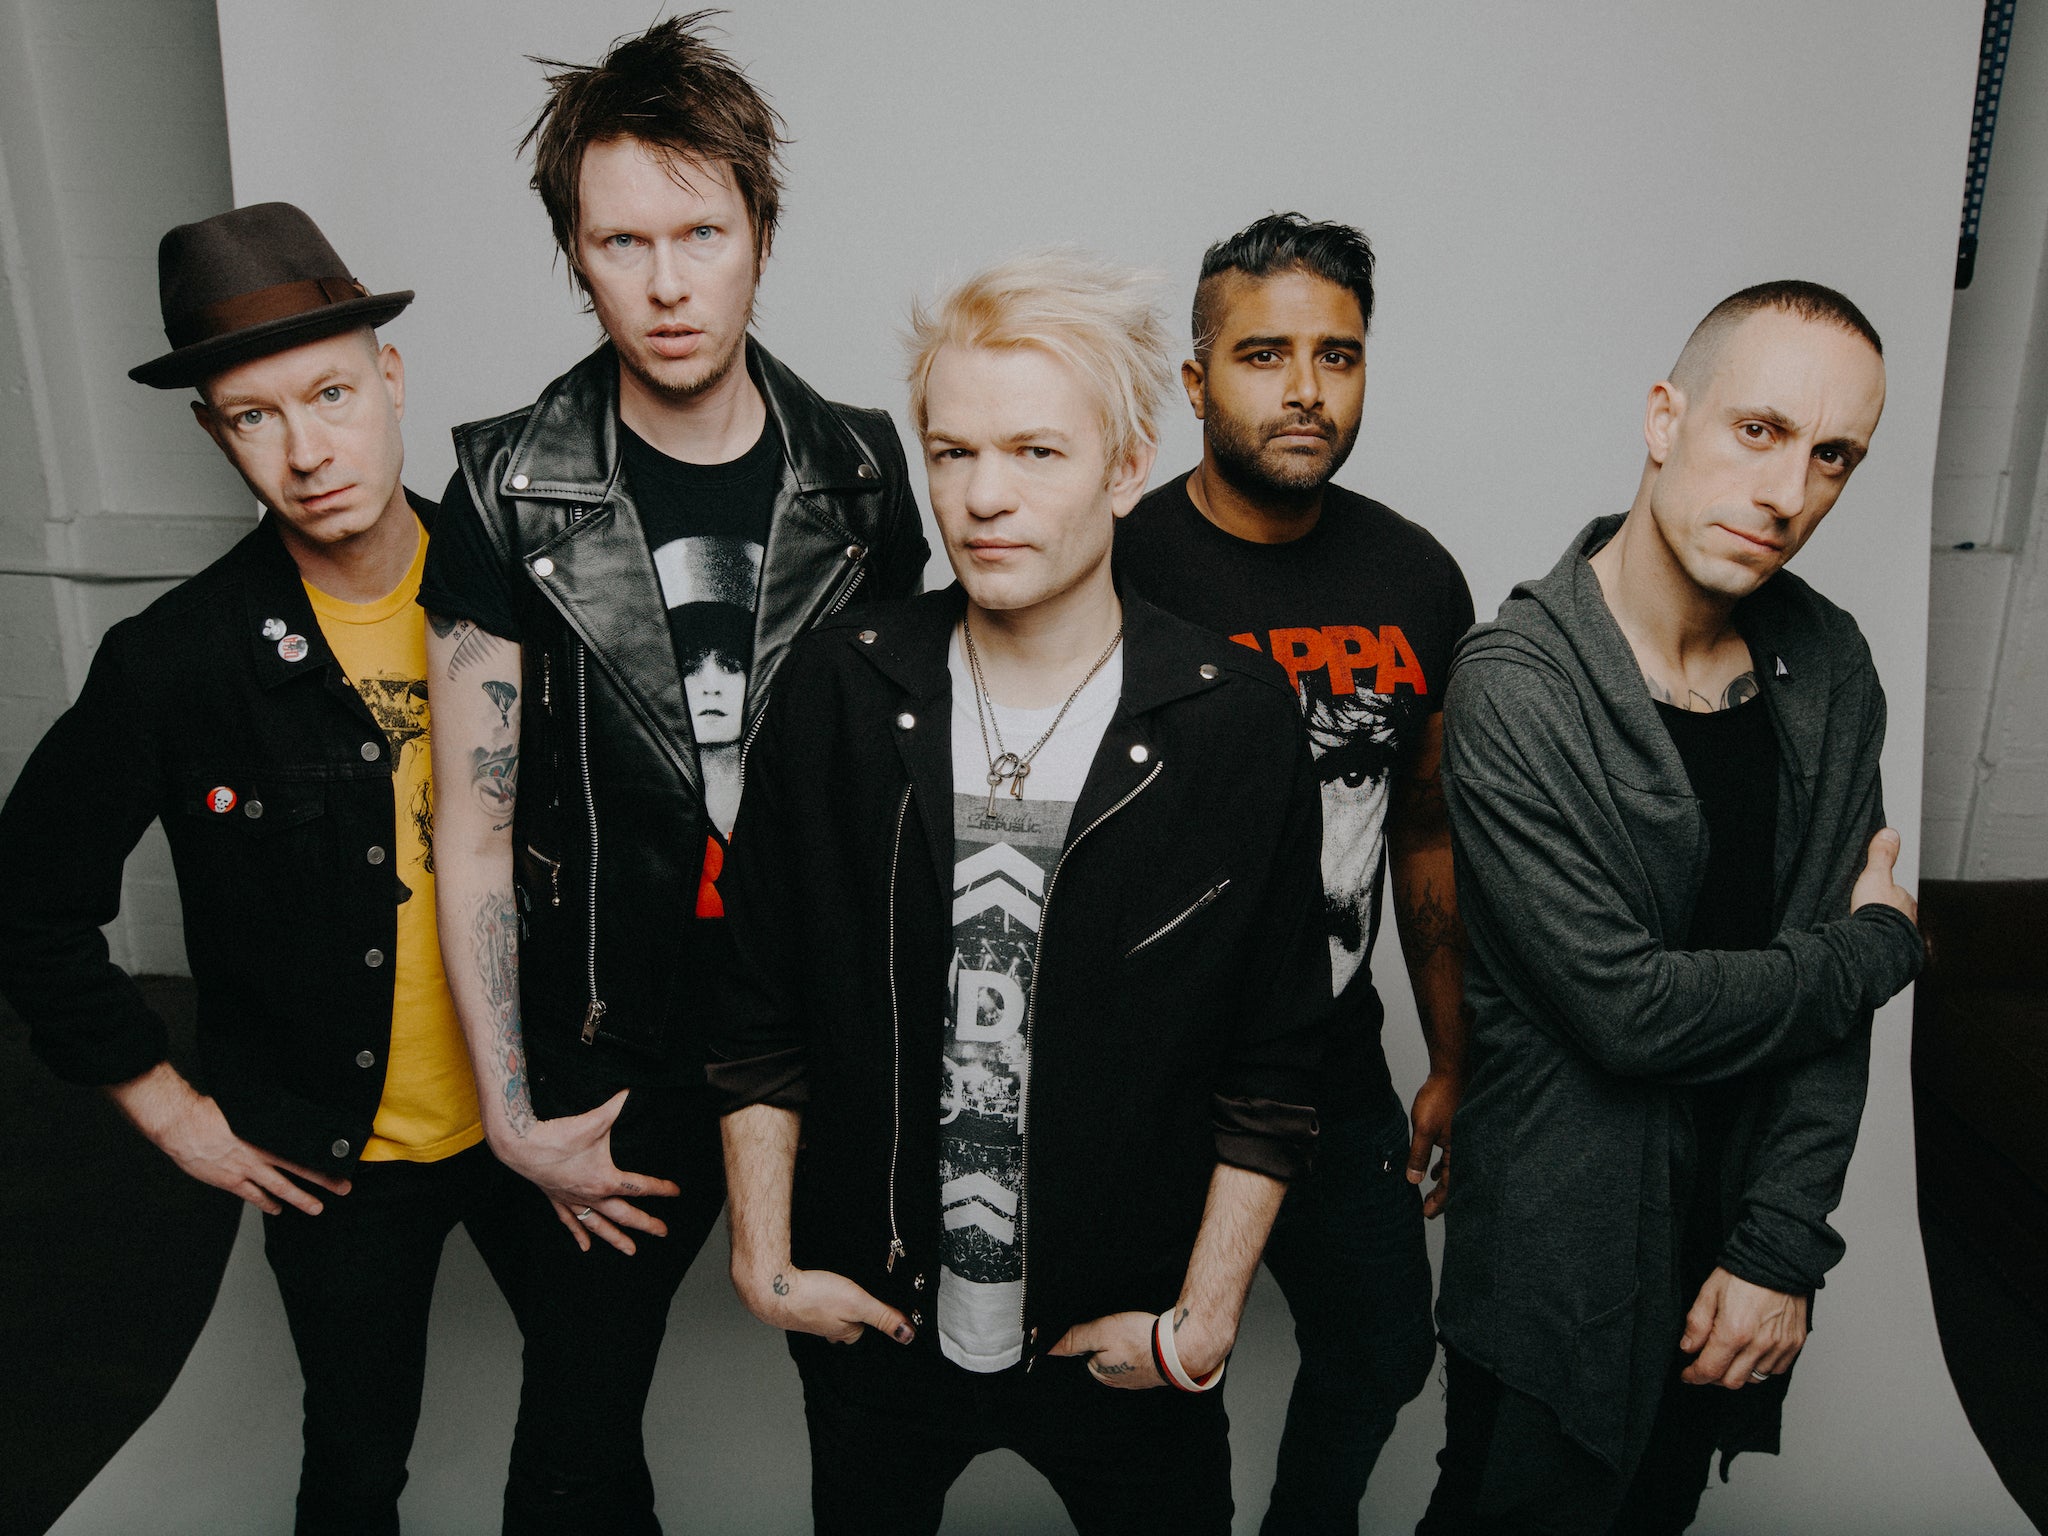 Sum 41 are among the bands surfing the second wave of pop-punk